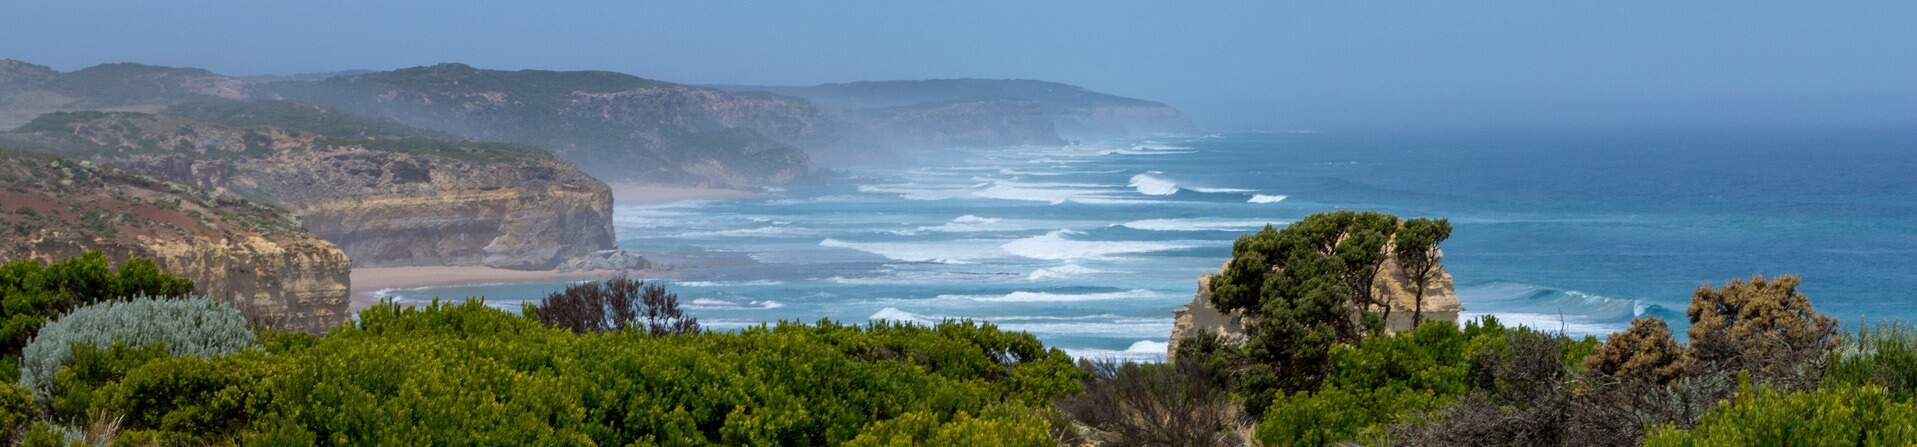 What beaches are along the Great Ocean Road?